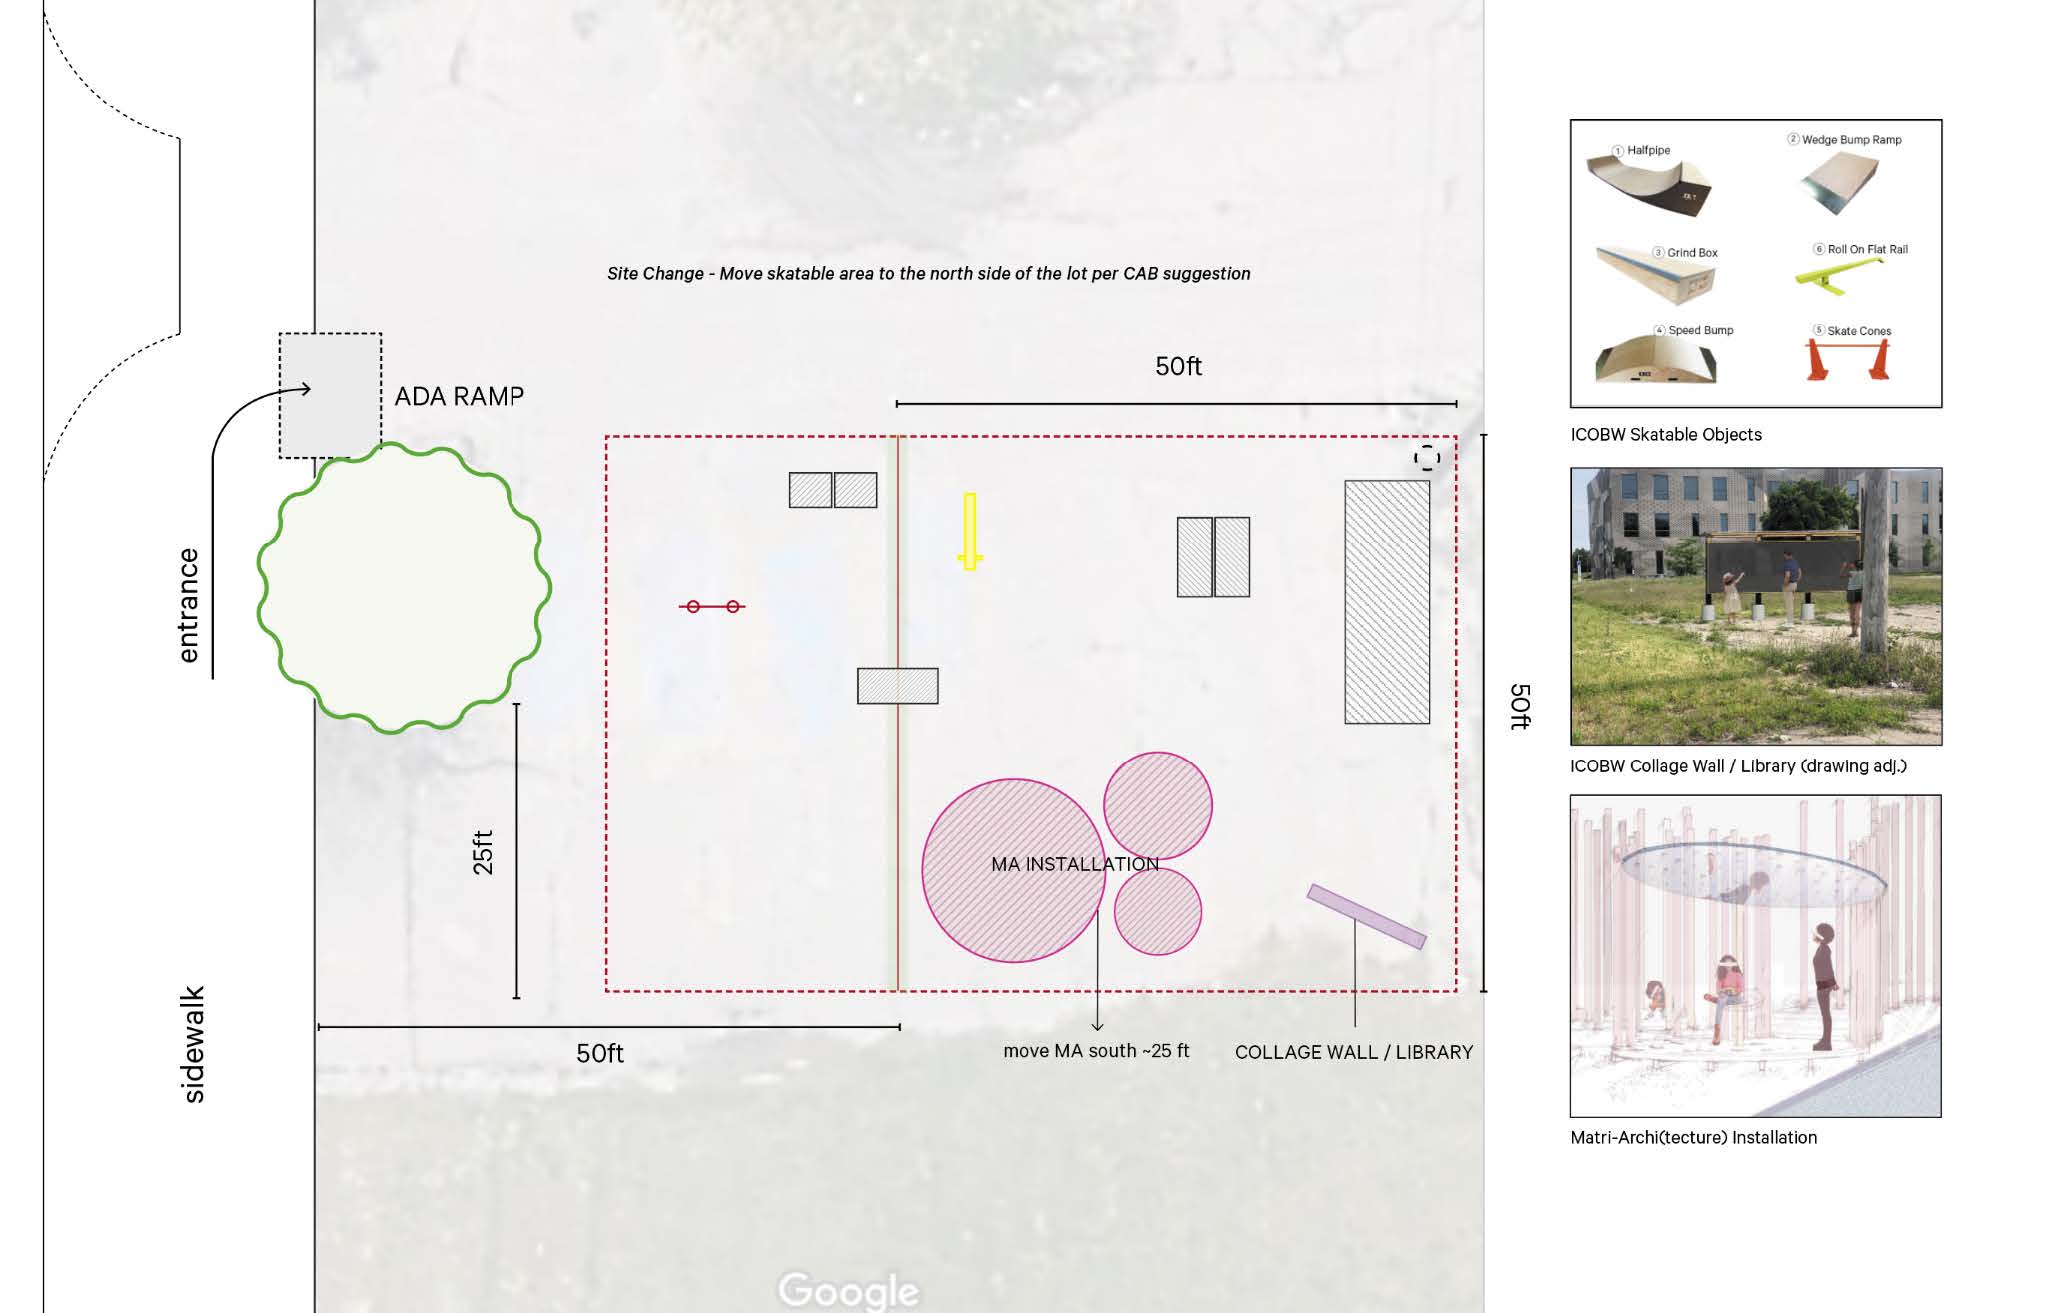 Figure 4. Image of Site plan with pre-fabricated items, collage wall, and the Matri-Archi(tecture) instillation